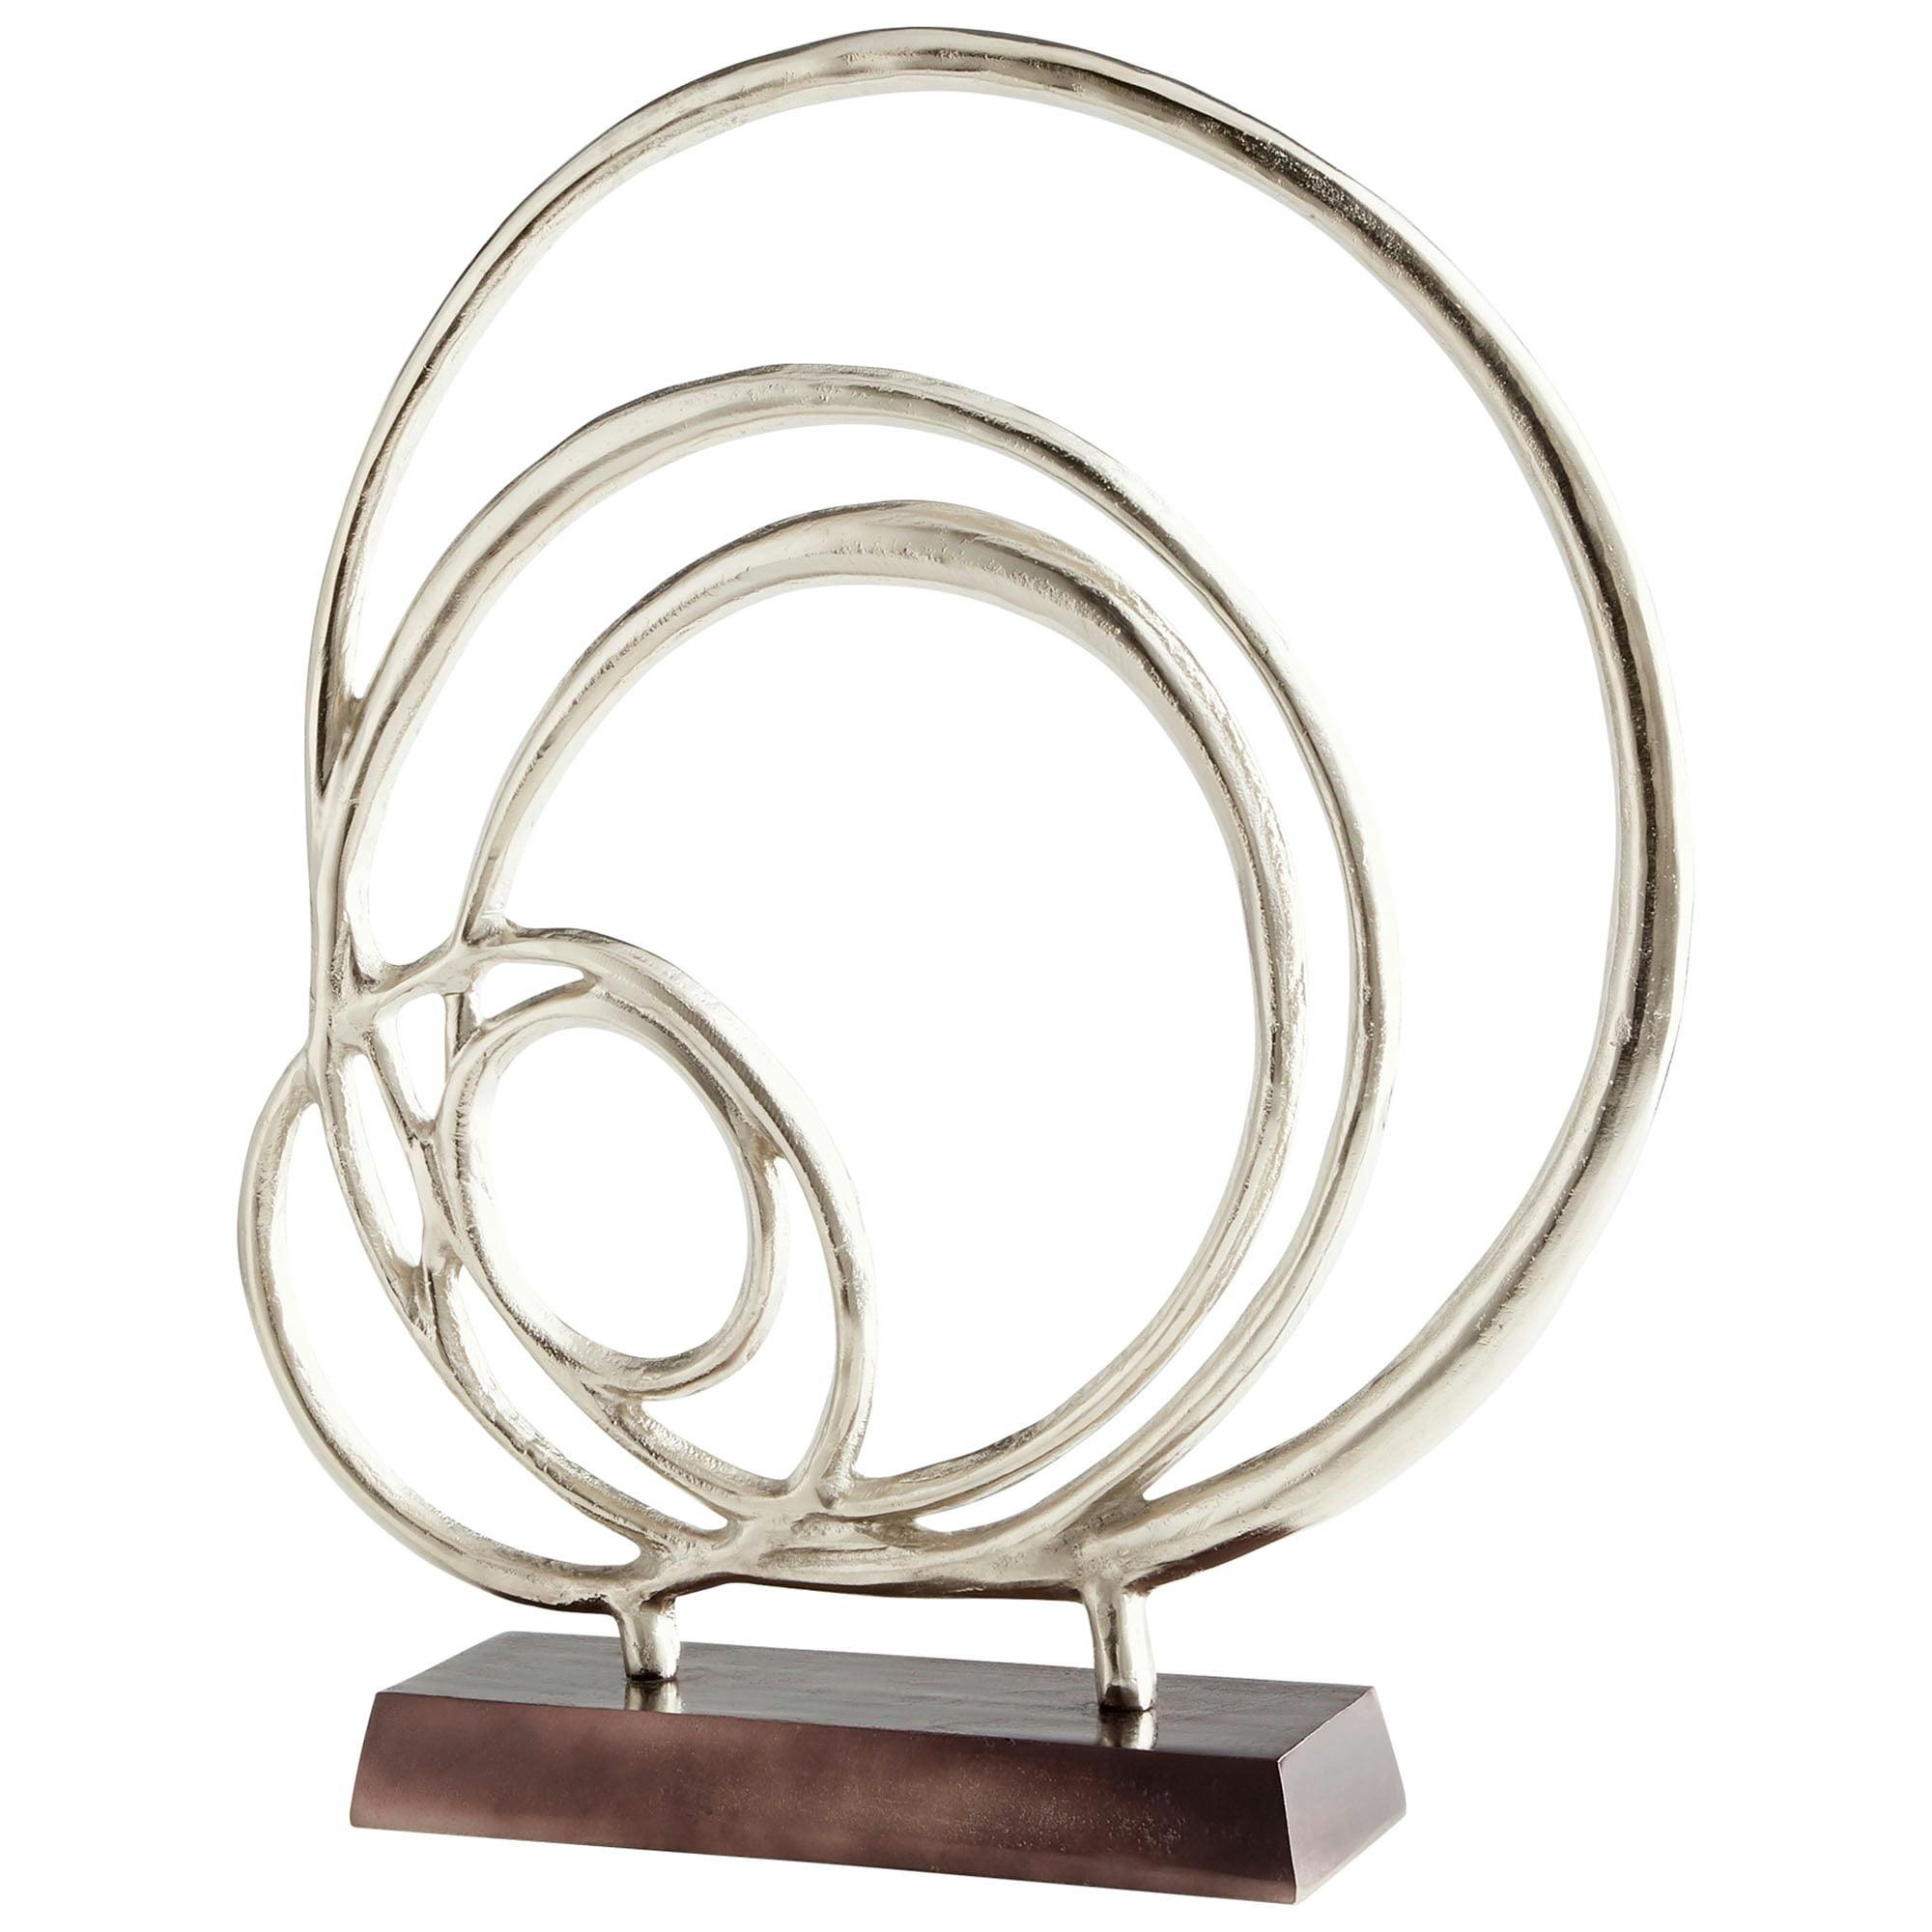 Contemporary Nickel Finish Free-Form Sculpture, 27" Height